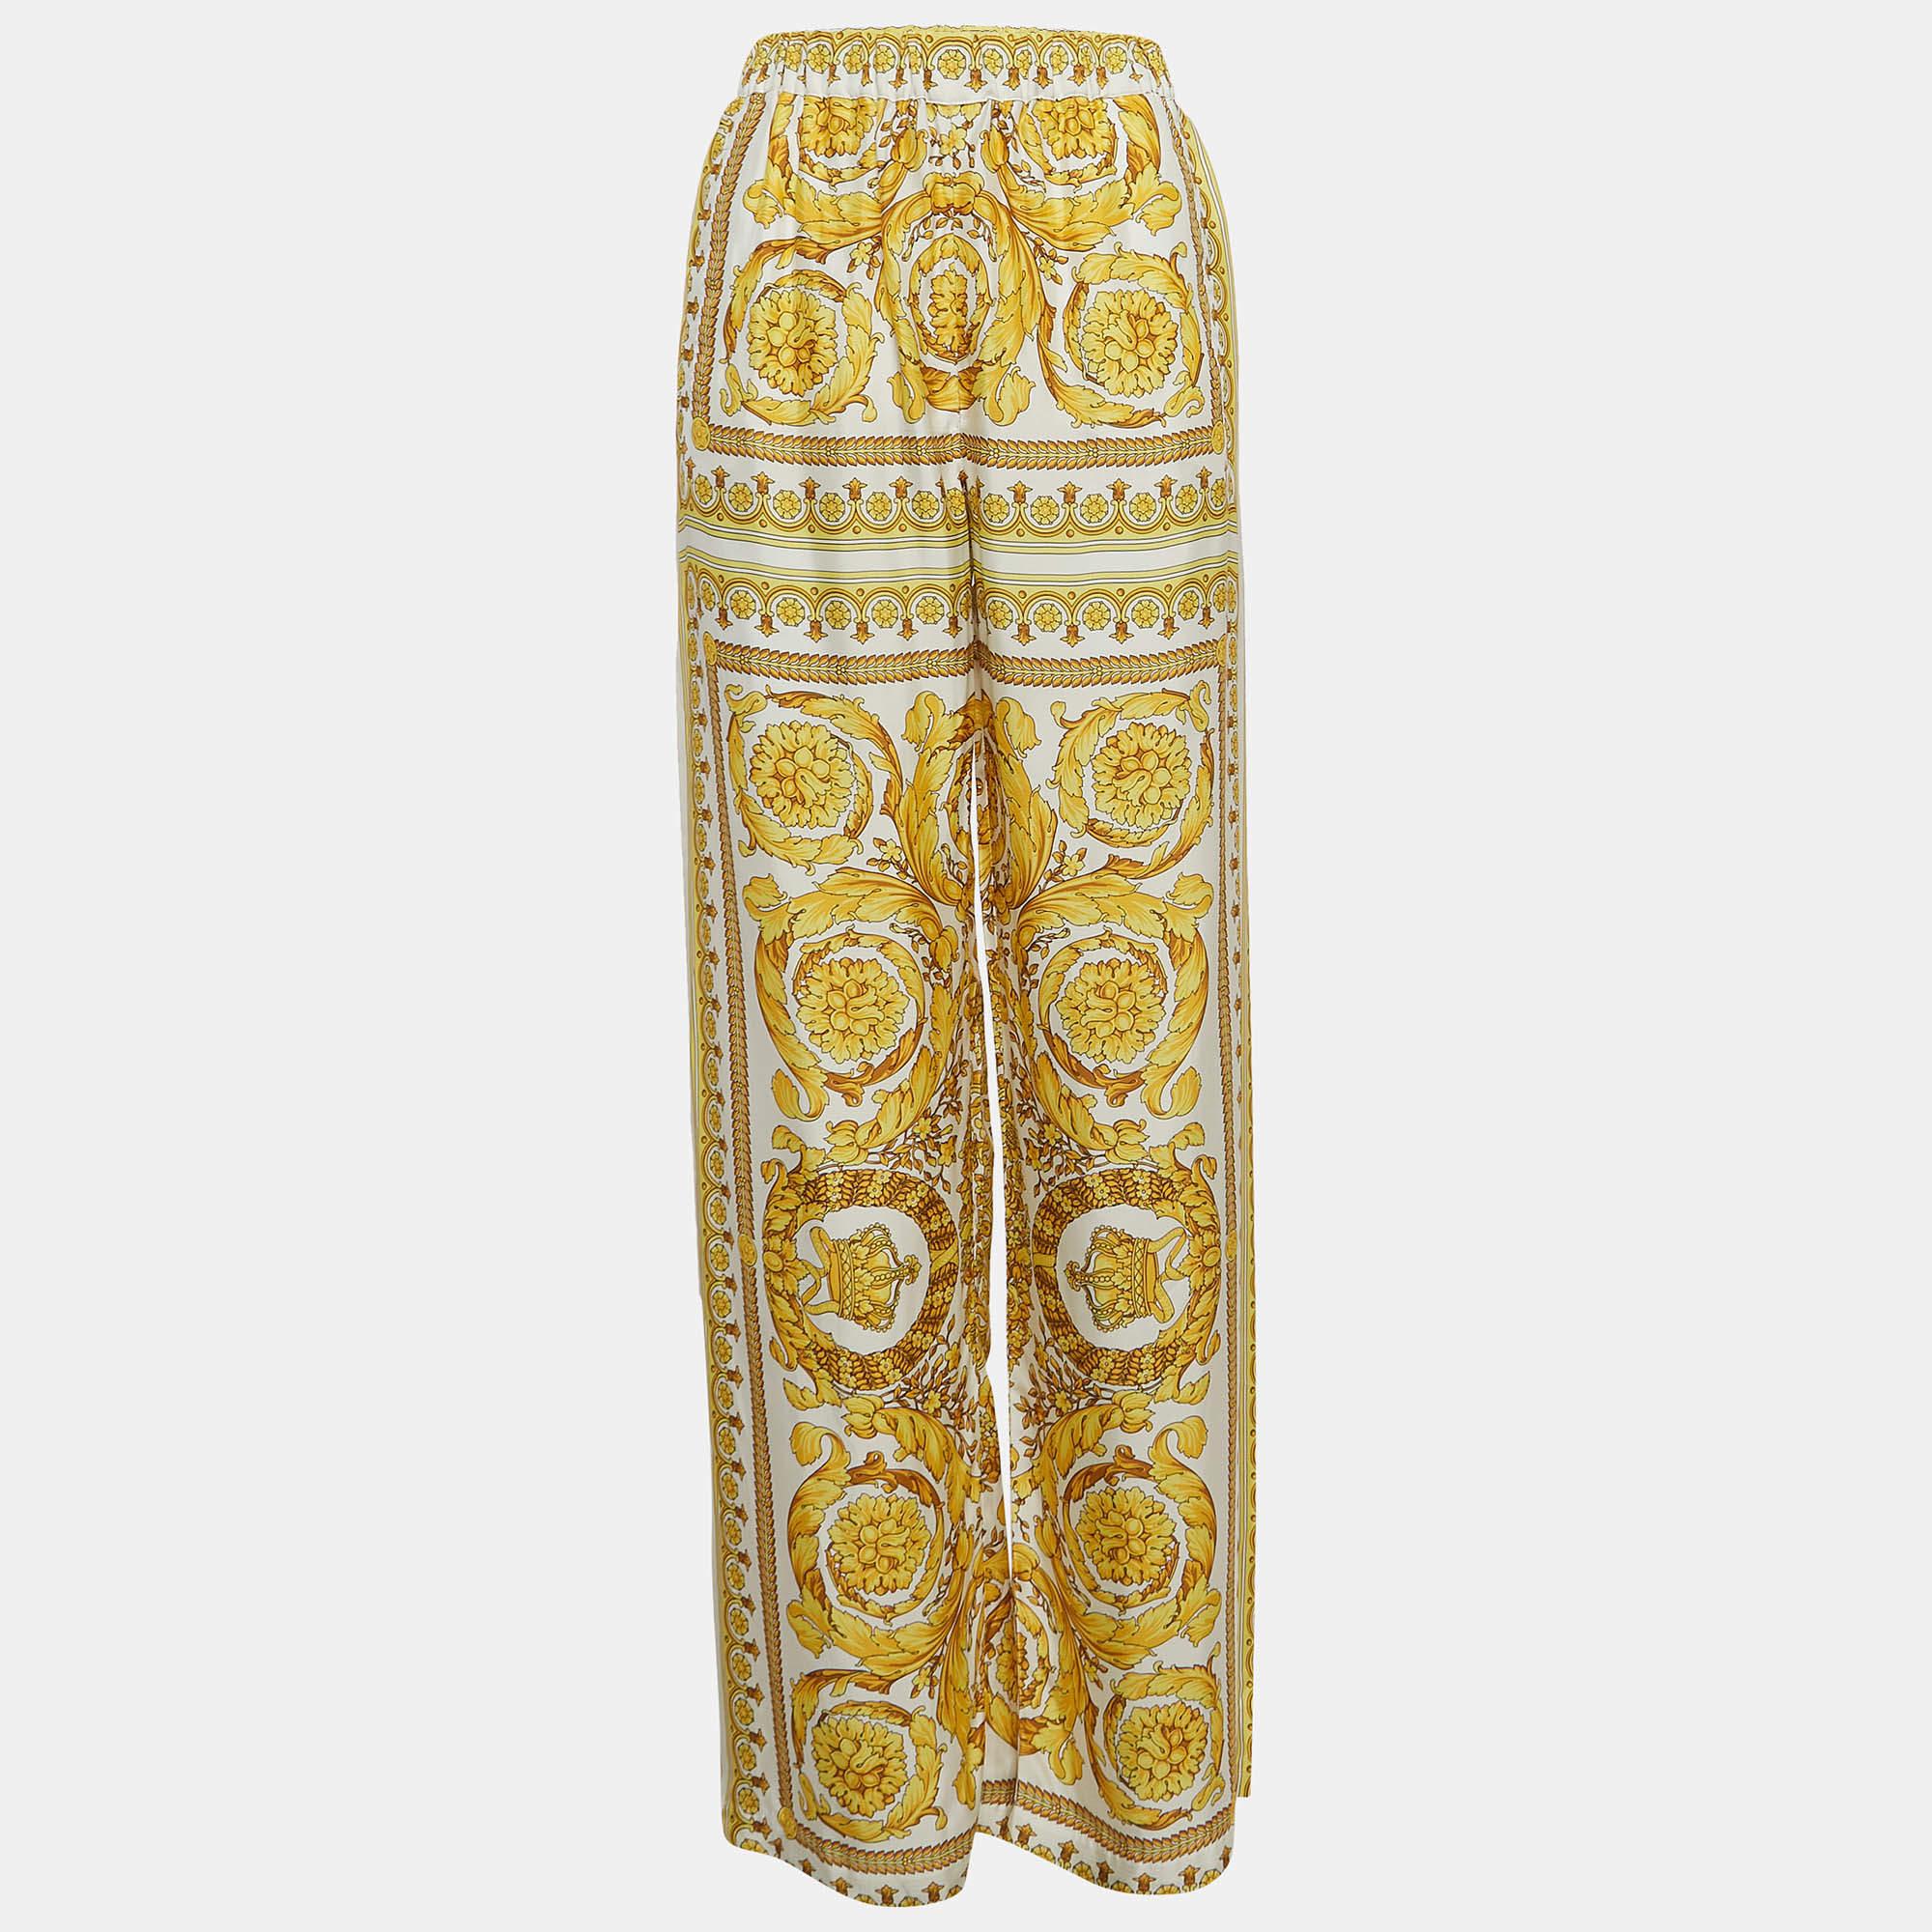 The Versace trousers epitomize luxury and elegance. Crafted from premium crepe fabric, these trousers feature the iconic Barocco print in vibrant yellow hues, exuding sophistication. With a flattering wide-leg silhouette, they effortlessly merge